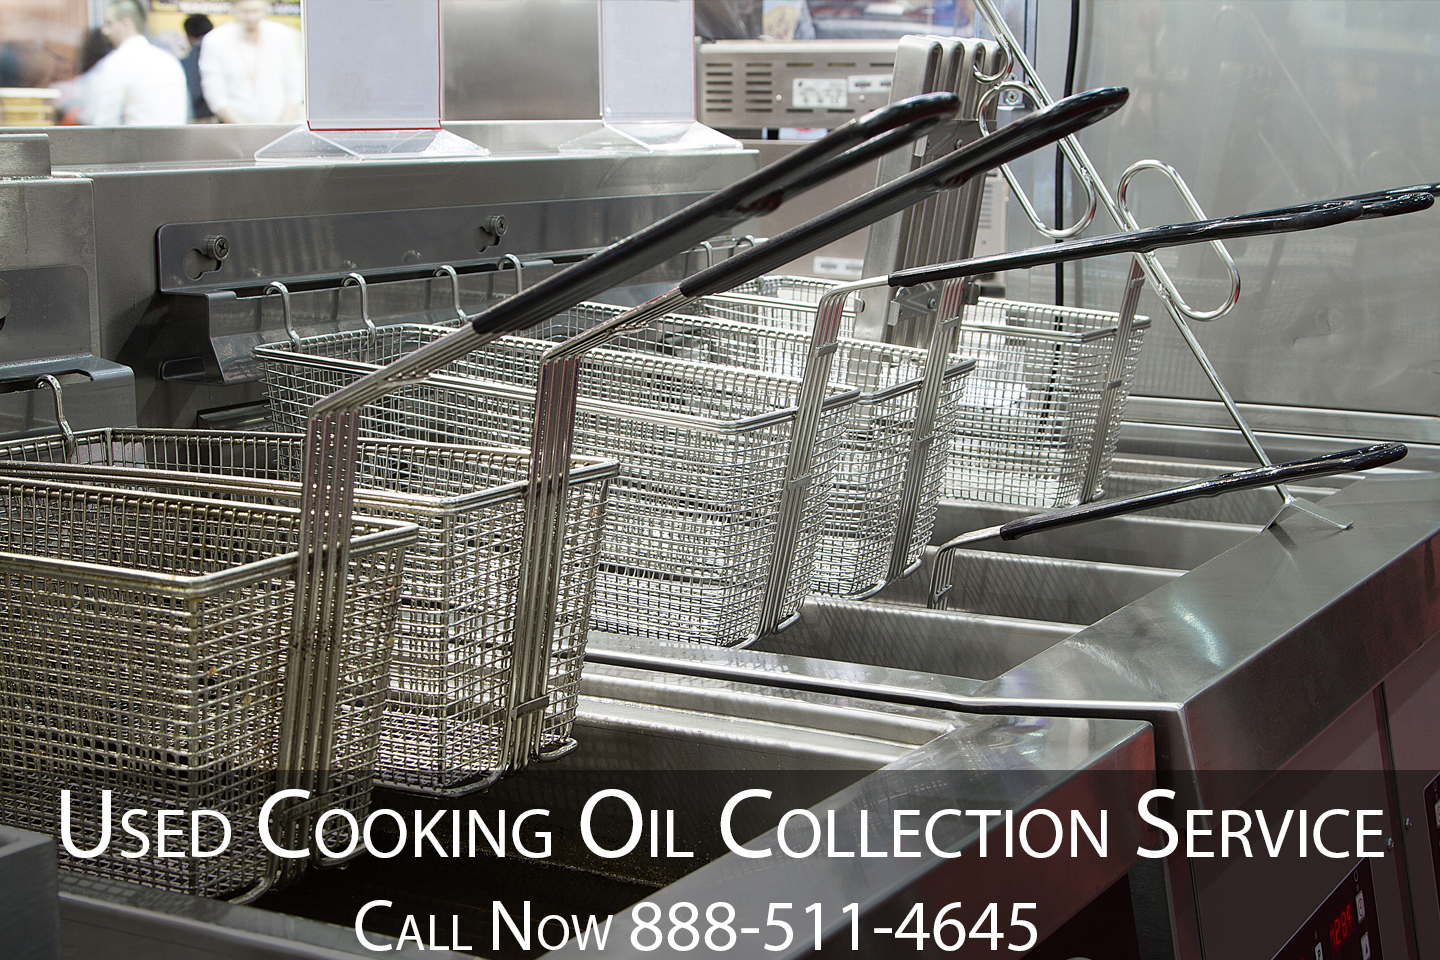 It is required by the city Anahiem, for all food servicing establishments to hire a licensed used cooking oil collection company to pick up and properly remove their waste cooking oil. As grease collection recycling companies, we must ensure that all waste is transported safely and disposed properly.  The majority of used cooking oil collected from commercial kitchens are filtered and processed turning it into renewable fuel called biodiesel. With a large increase in food servicing estabishments, a substantial amount of coming from restaurants are responsible for a major percentage of fueling transportation vehicles.